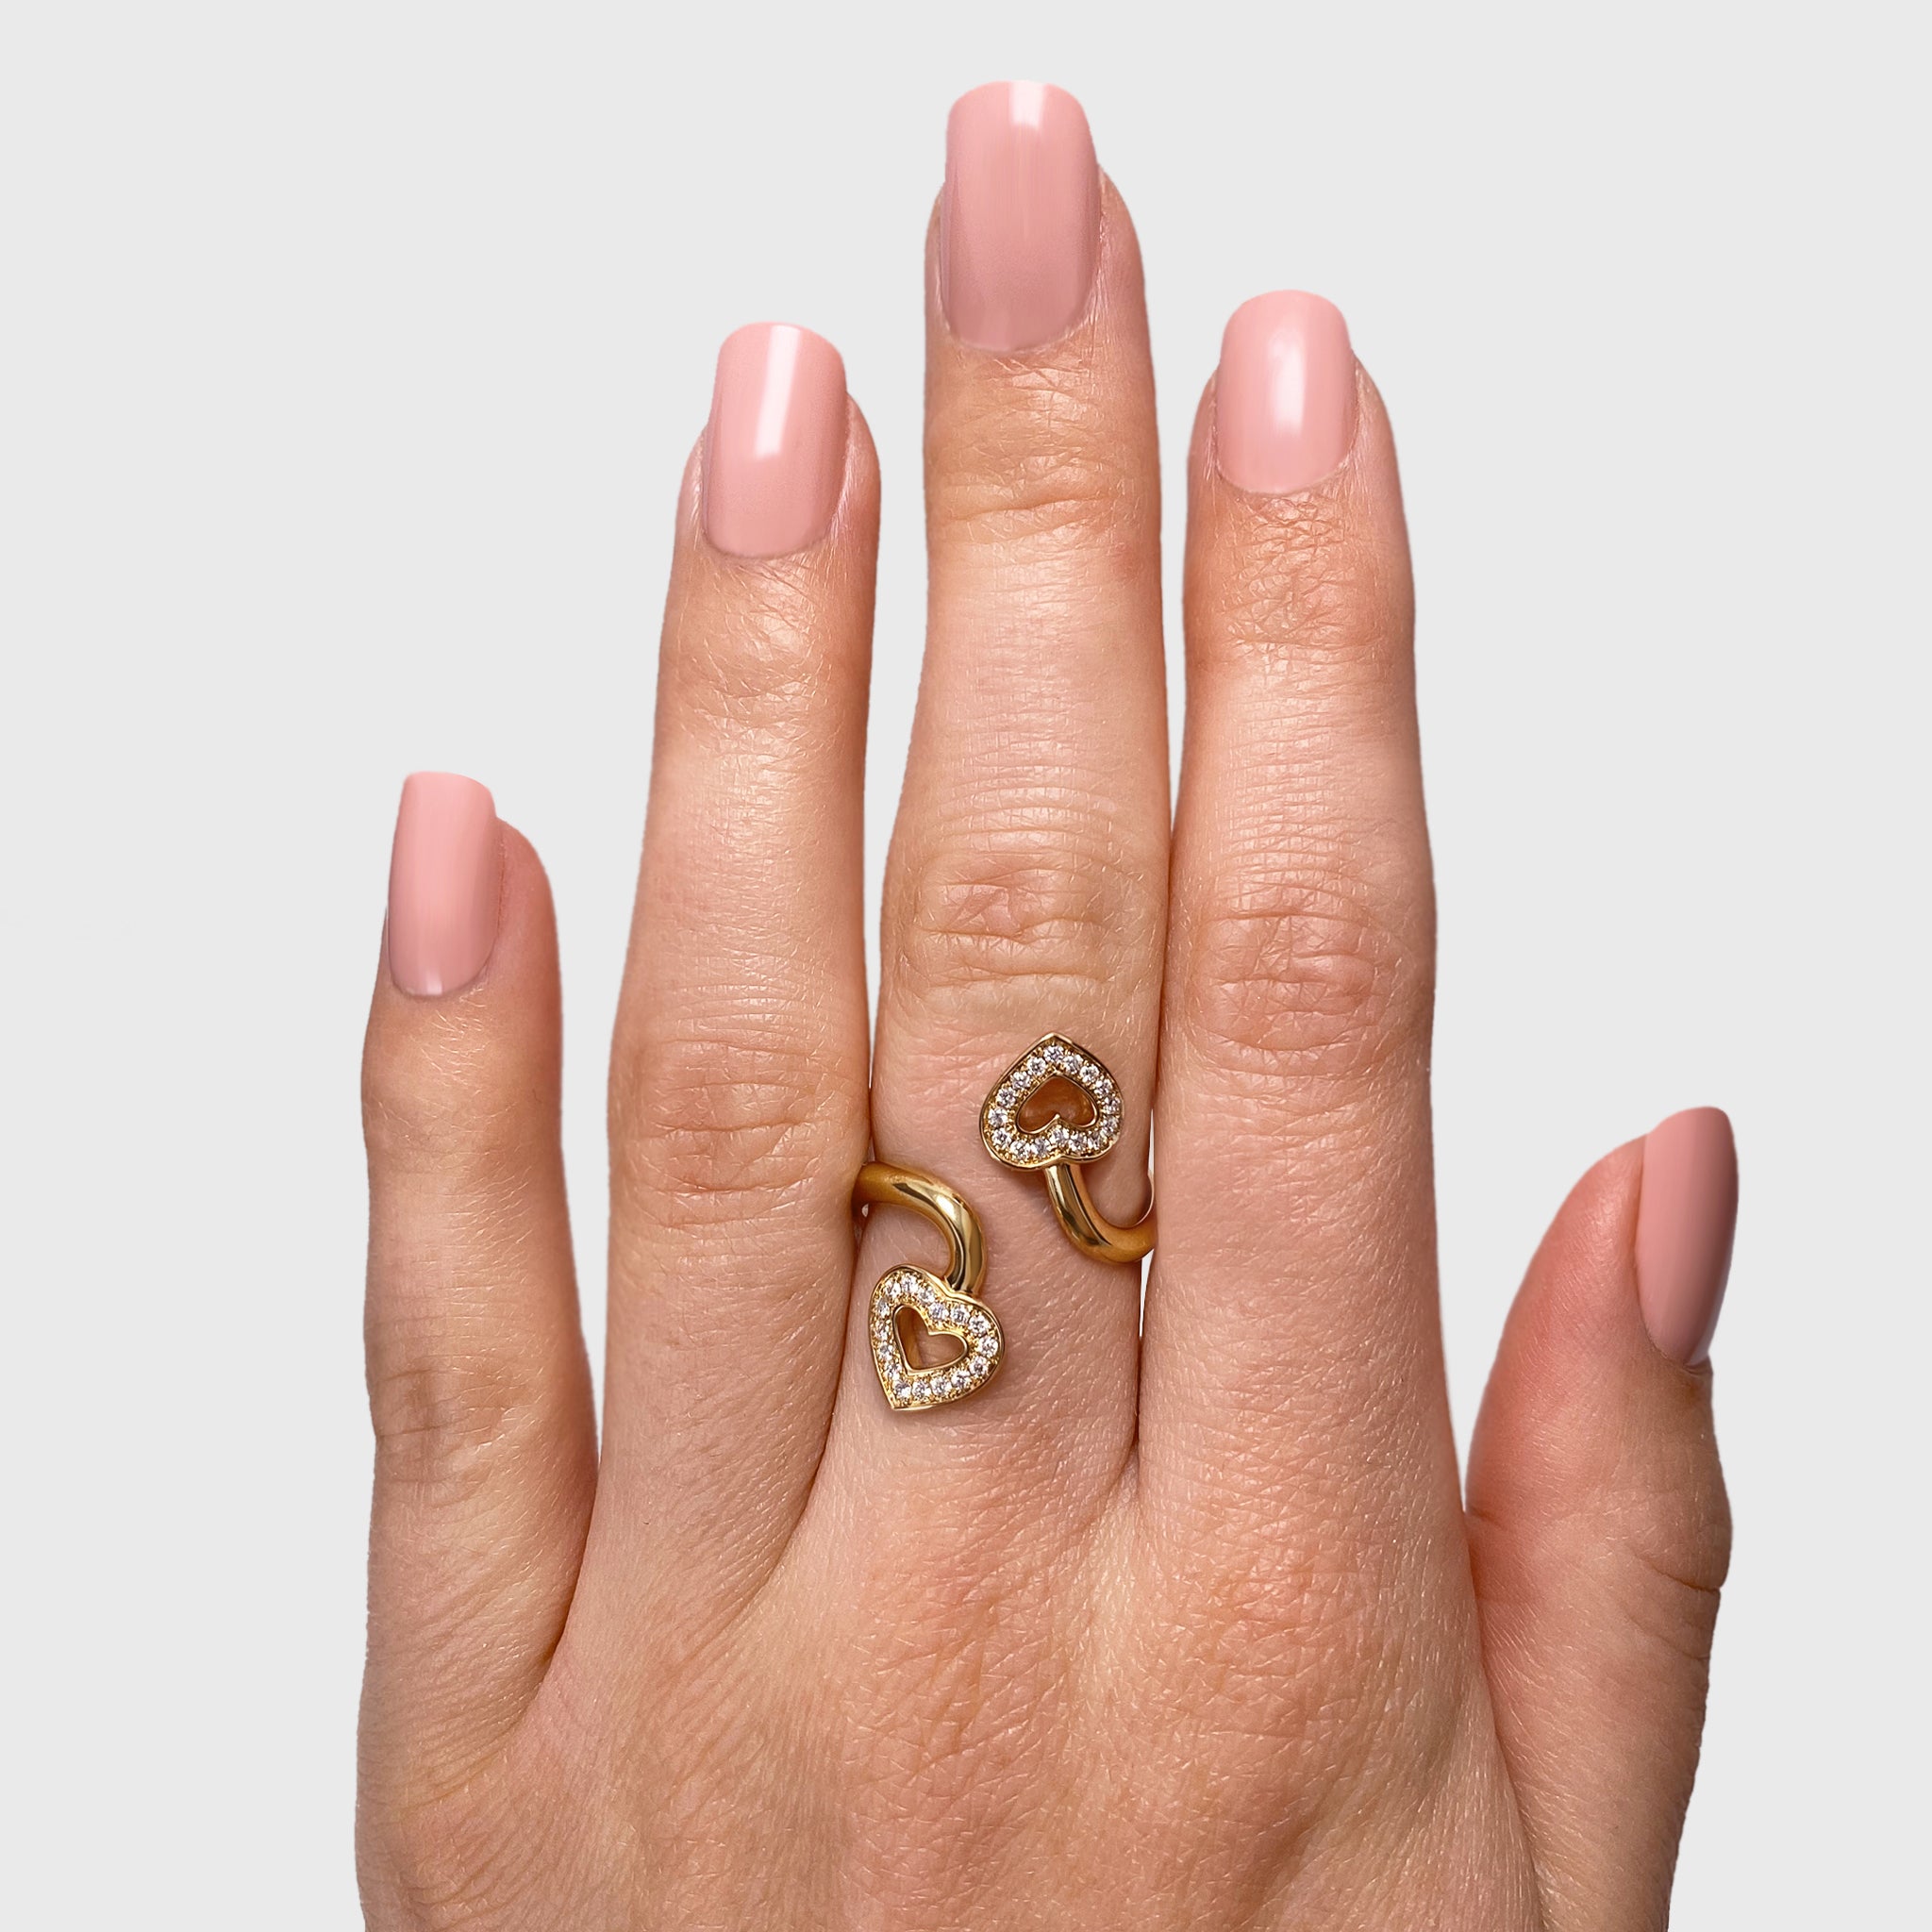 Shimansky - Women Wearing the Two Hearts Twist Diamond Pave Ring 0.20ct crafted in 18K Yellow Gold